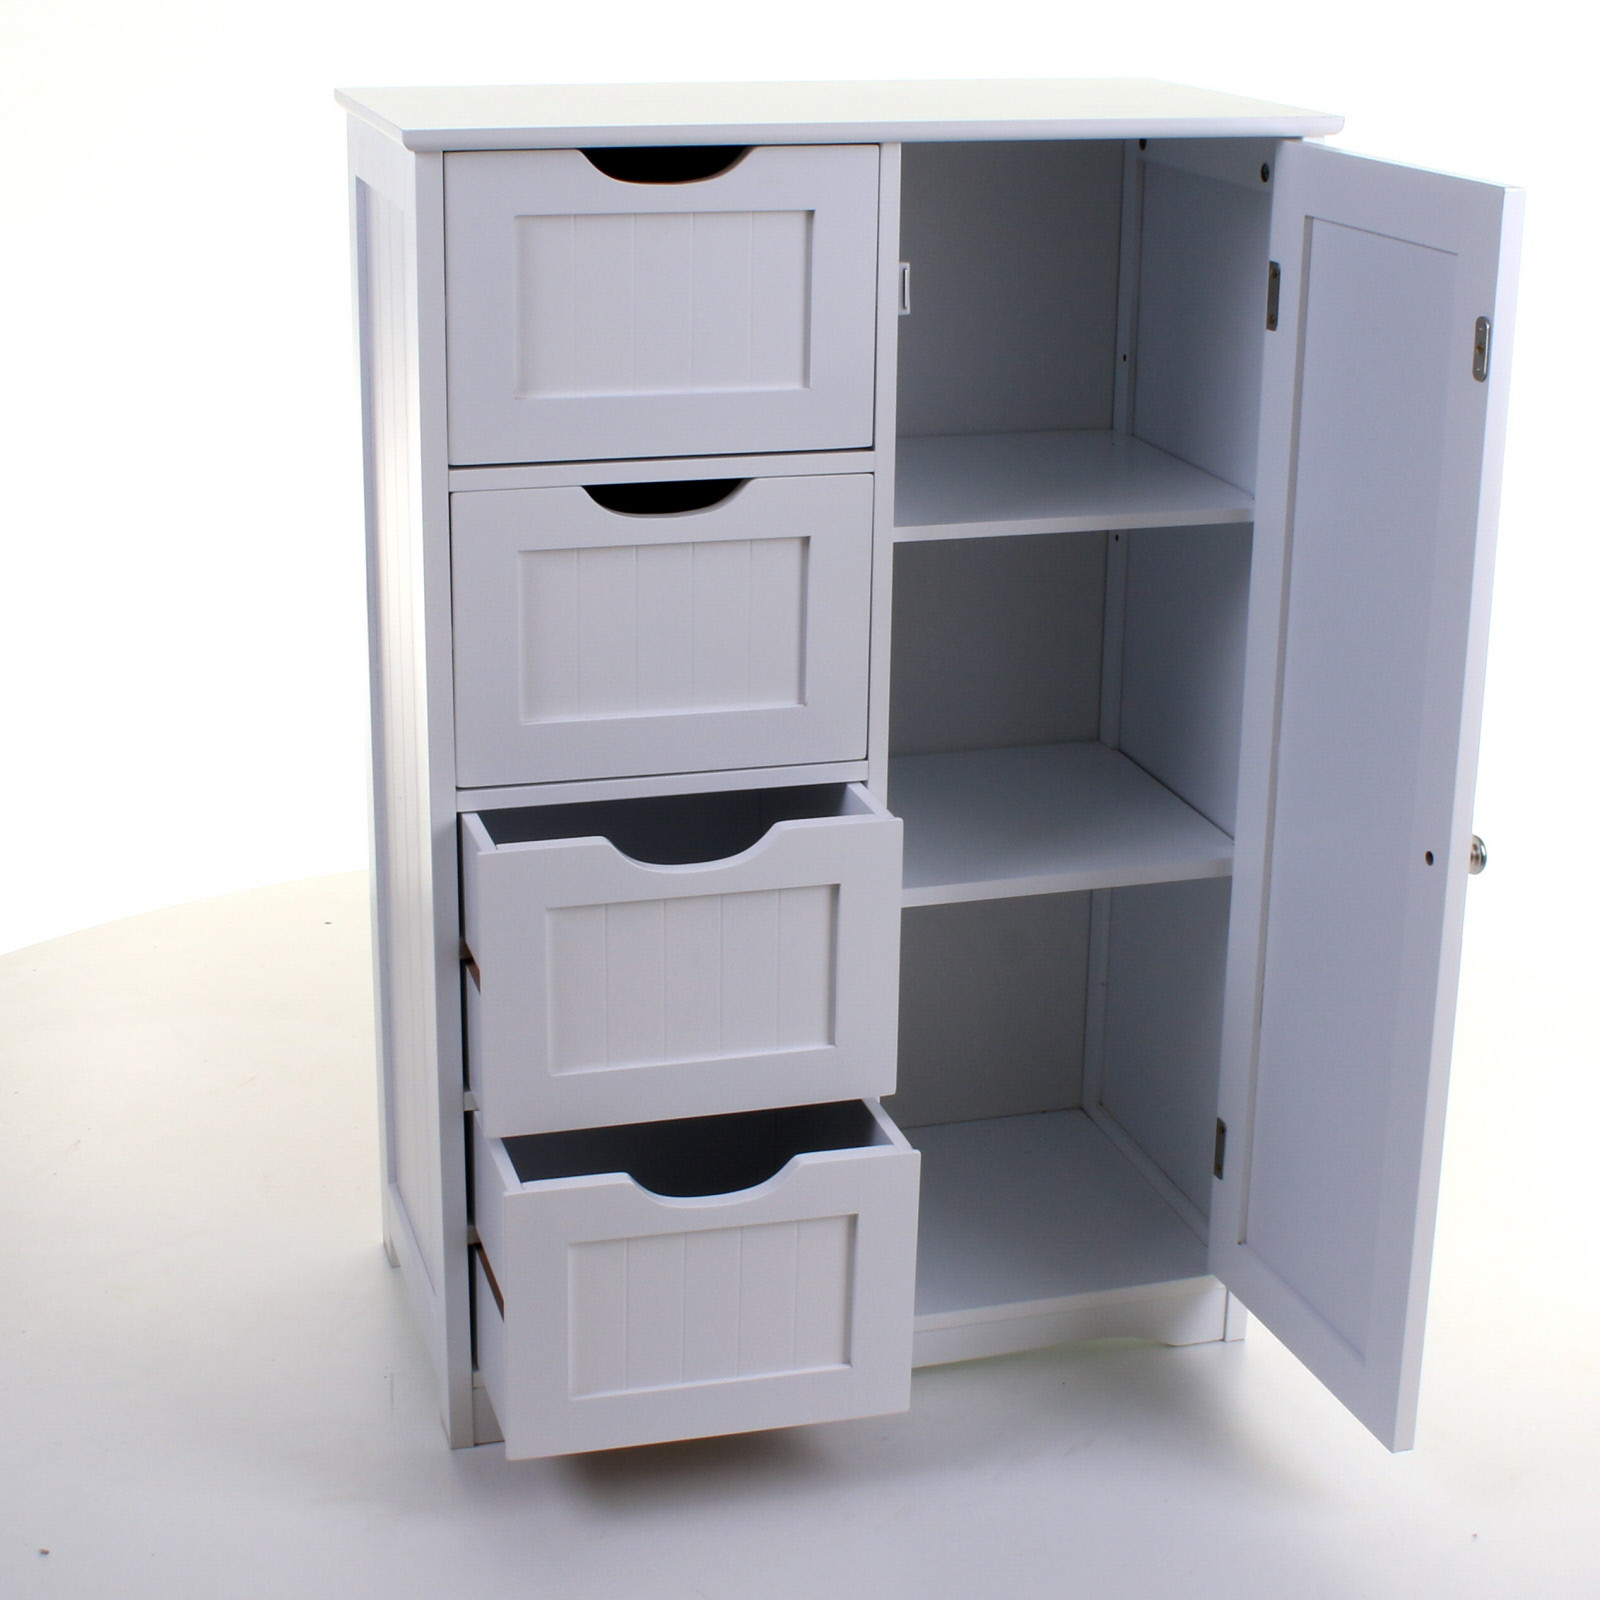 Bathroom Storage Cabinet With Drawers
 4 DRAWER CABINET BATHROOM STORAGE UNIT CHEST CUPBOARD